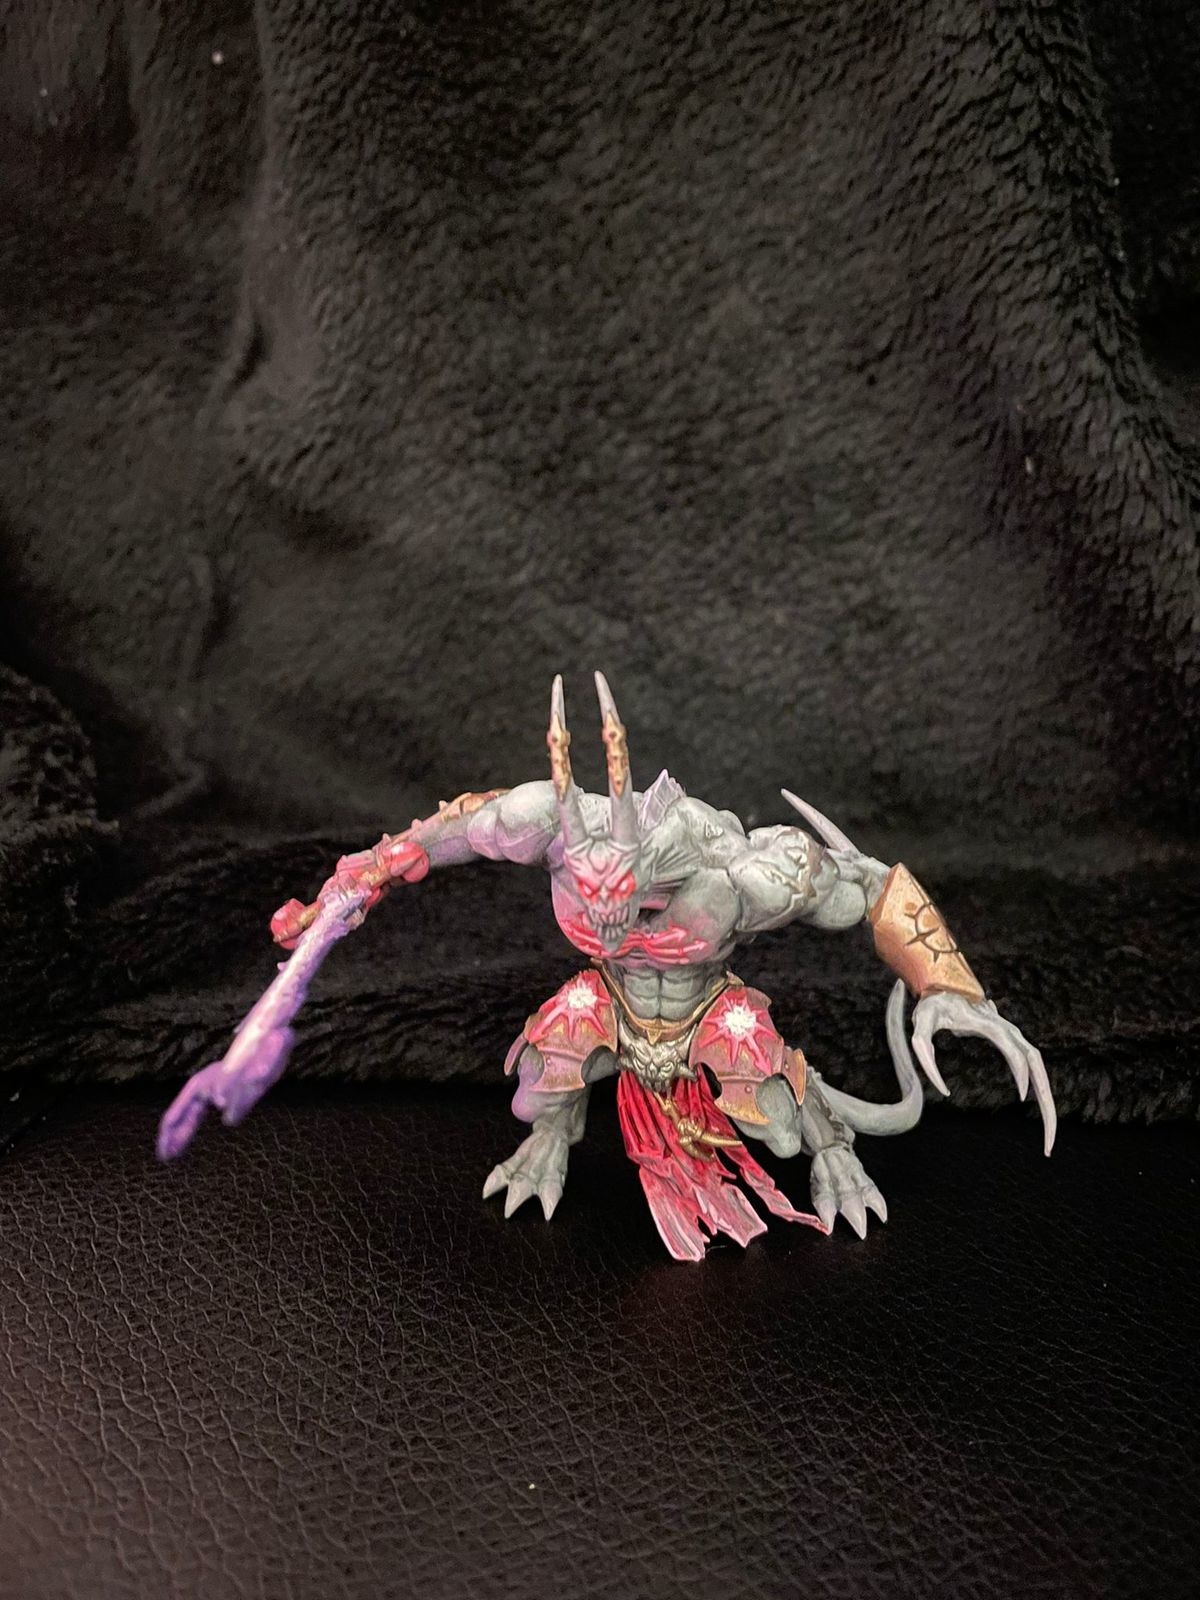 Deamon Prince work in progress. Recently decided to start collecting my first proper army and decided to make a demon army. Got this dude a few days ago and he'